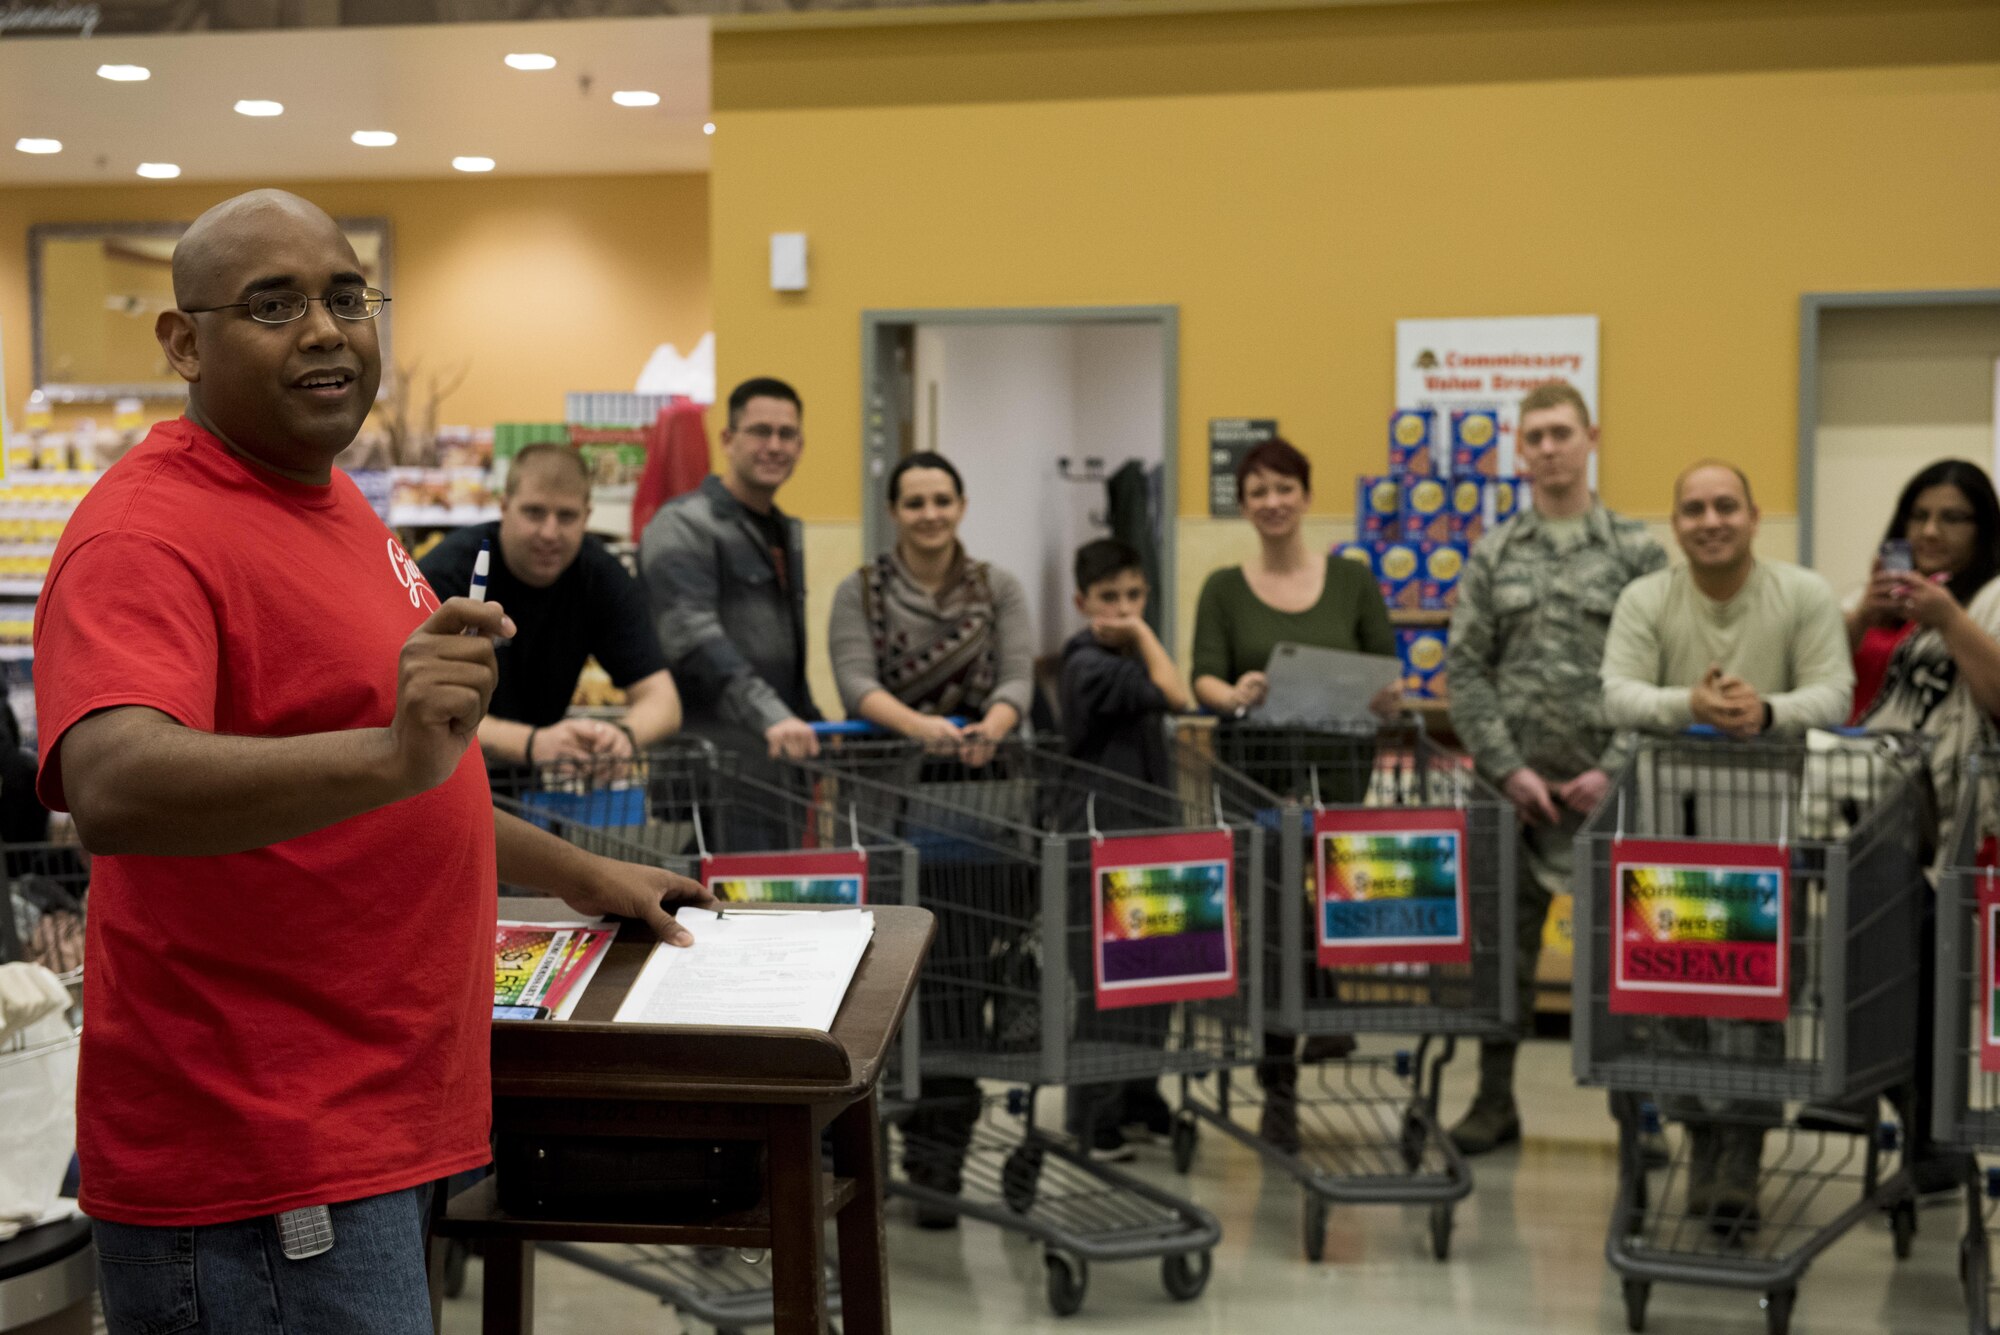 U.S. Air Force Staff Sgt. Willie Moore, left, 52nd Maintenance Squadron propulsion test cell supervisor, explains rules to contestants during the annual Spangdahlem Spouses and Enlisted Members Club Commissary Sweep at Spangdahlem Air Base, Germany, Nov. 15, 2016. During the event, Airmen and families guessed food item prices, answered riddles and shopped against the clock without exceeding their given allowance in order to win various amounts of commissary gift cards. (U.S. Air Force photo by Airman 1st Class Preston Cherry)